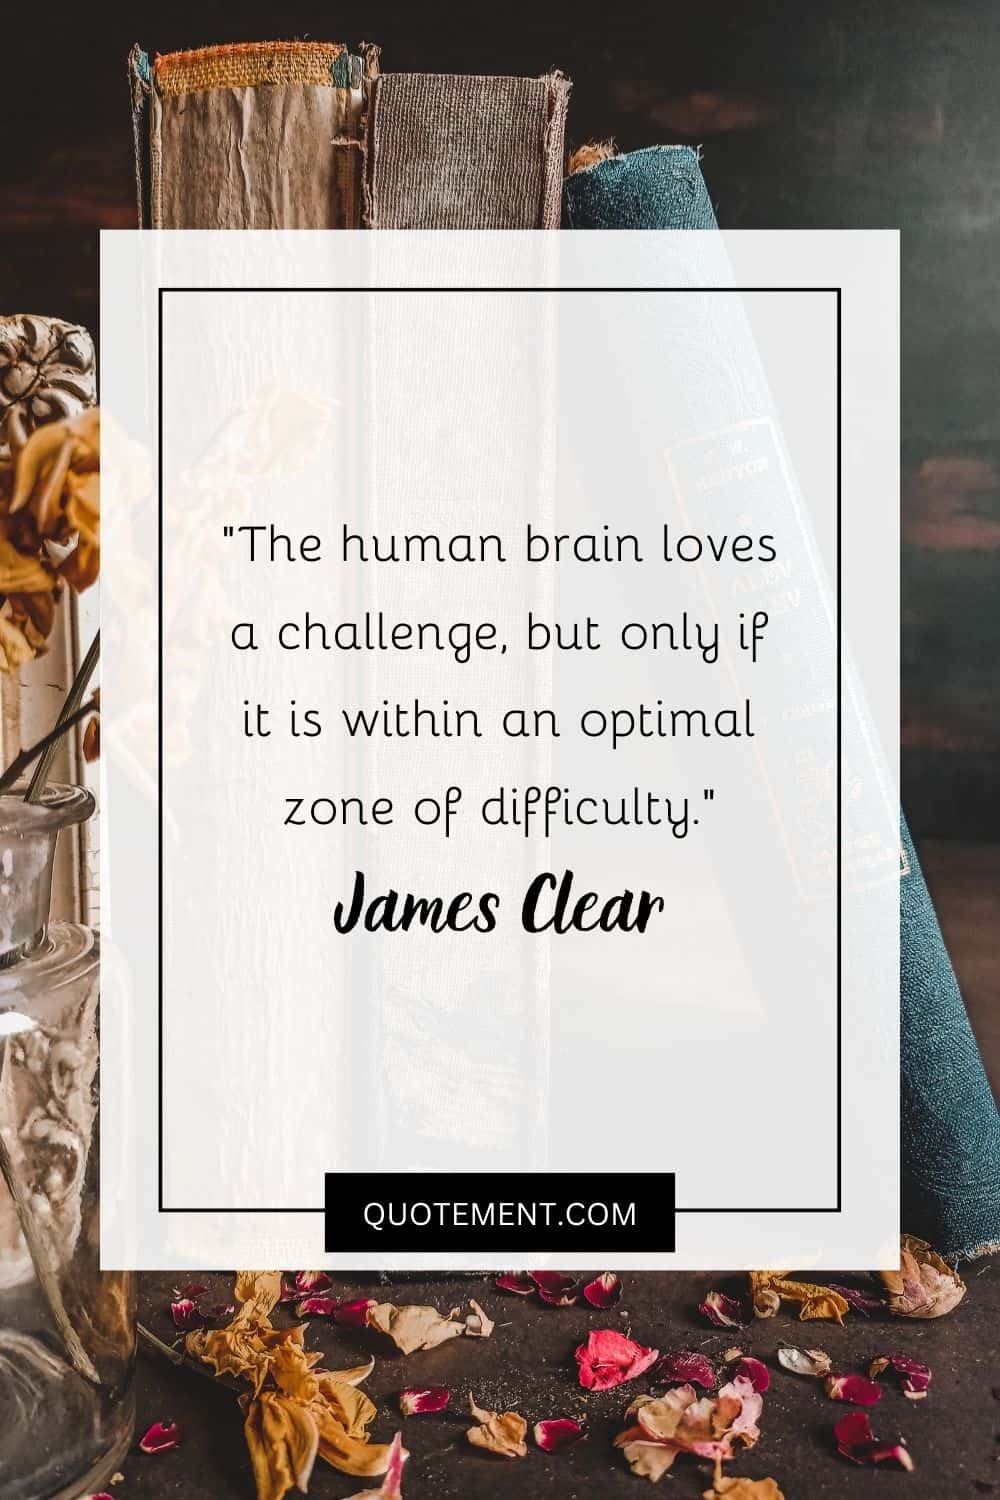 The human brain loves a challenge, but only if it is within an optimal zone of difficulty.